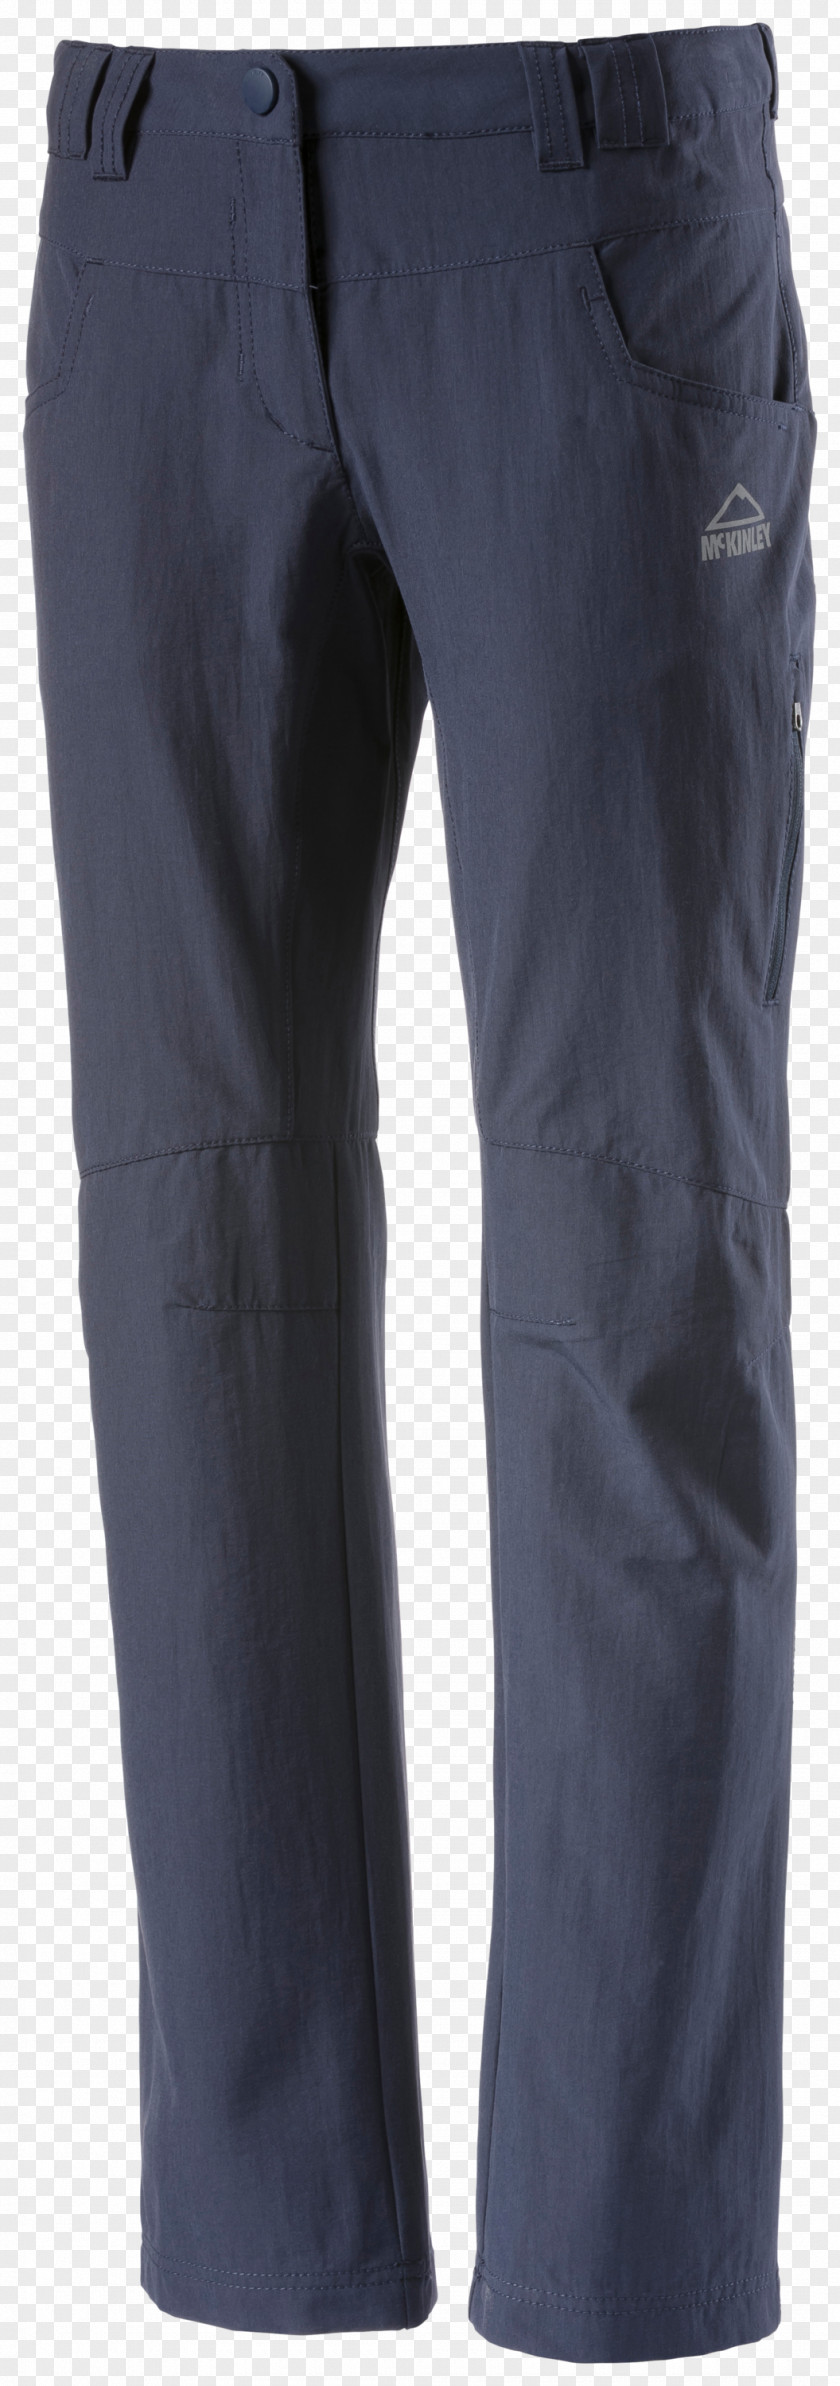 Jacket Pants Columbia Sportswear Clothing Discounts And Allowances Женская одежда PNG